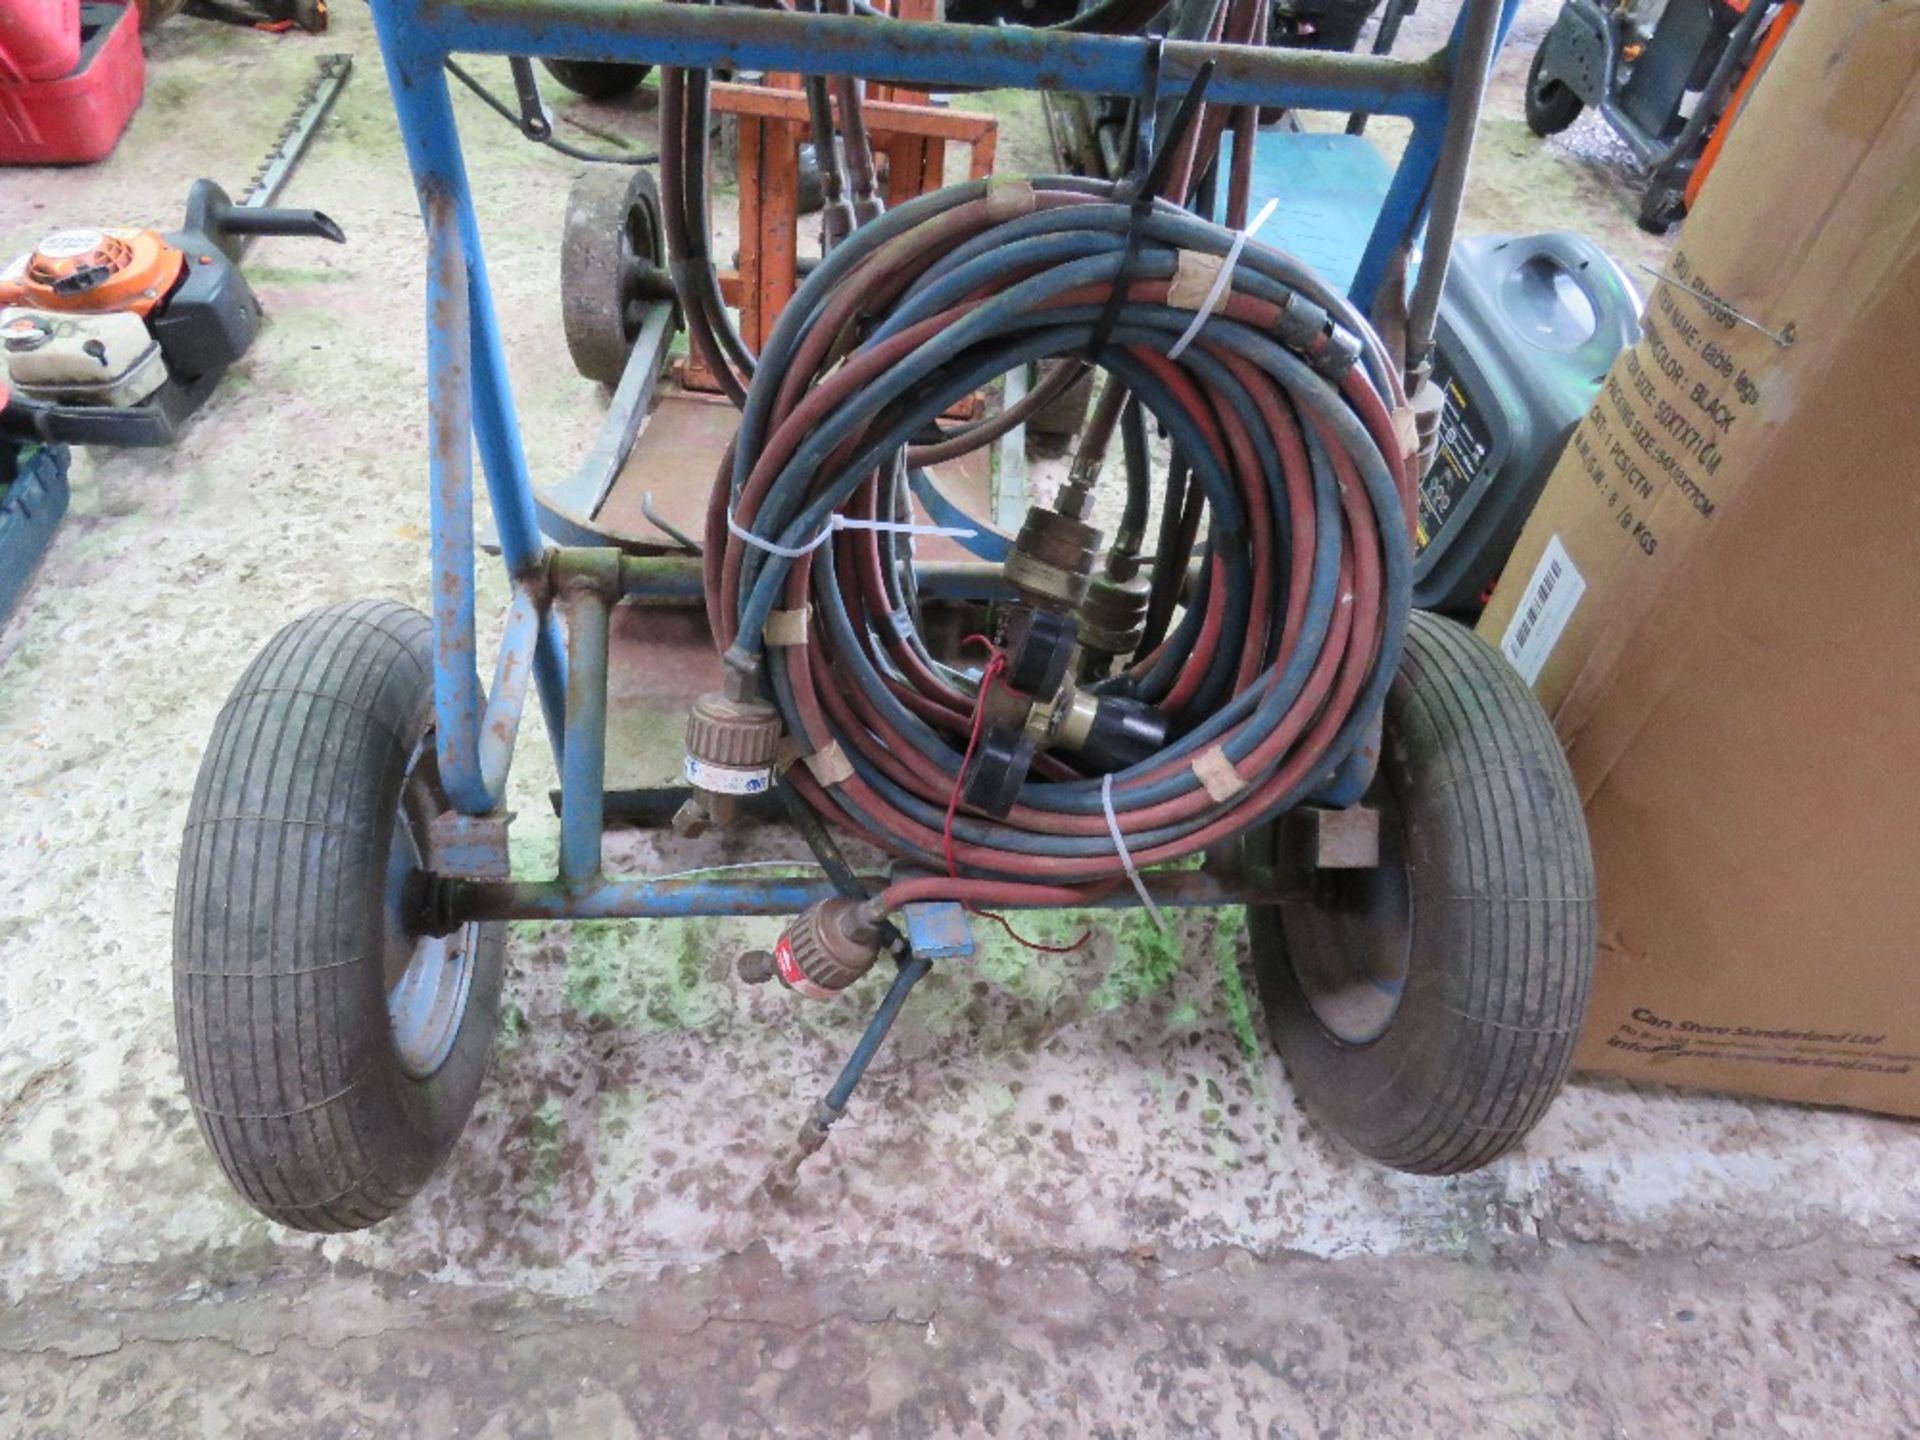 2 X SETS OF OXY-ACETELENE GAS HOSES PLUS A BARROW.....THIS LOT IS SOLD UNDER THE AUCTIONEERS MARGIN - Image 2 of 7